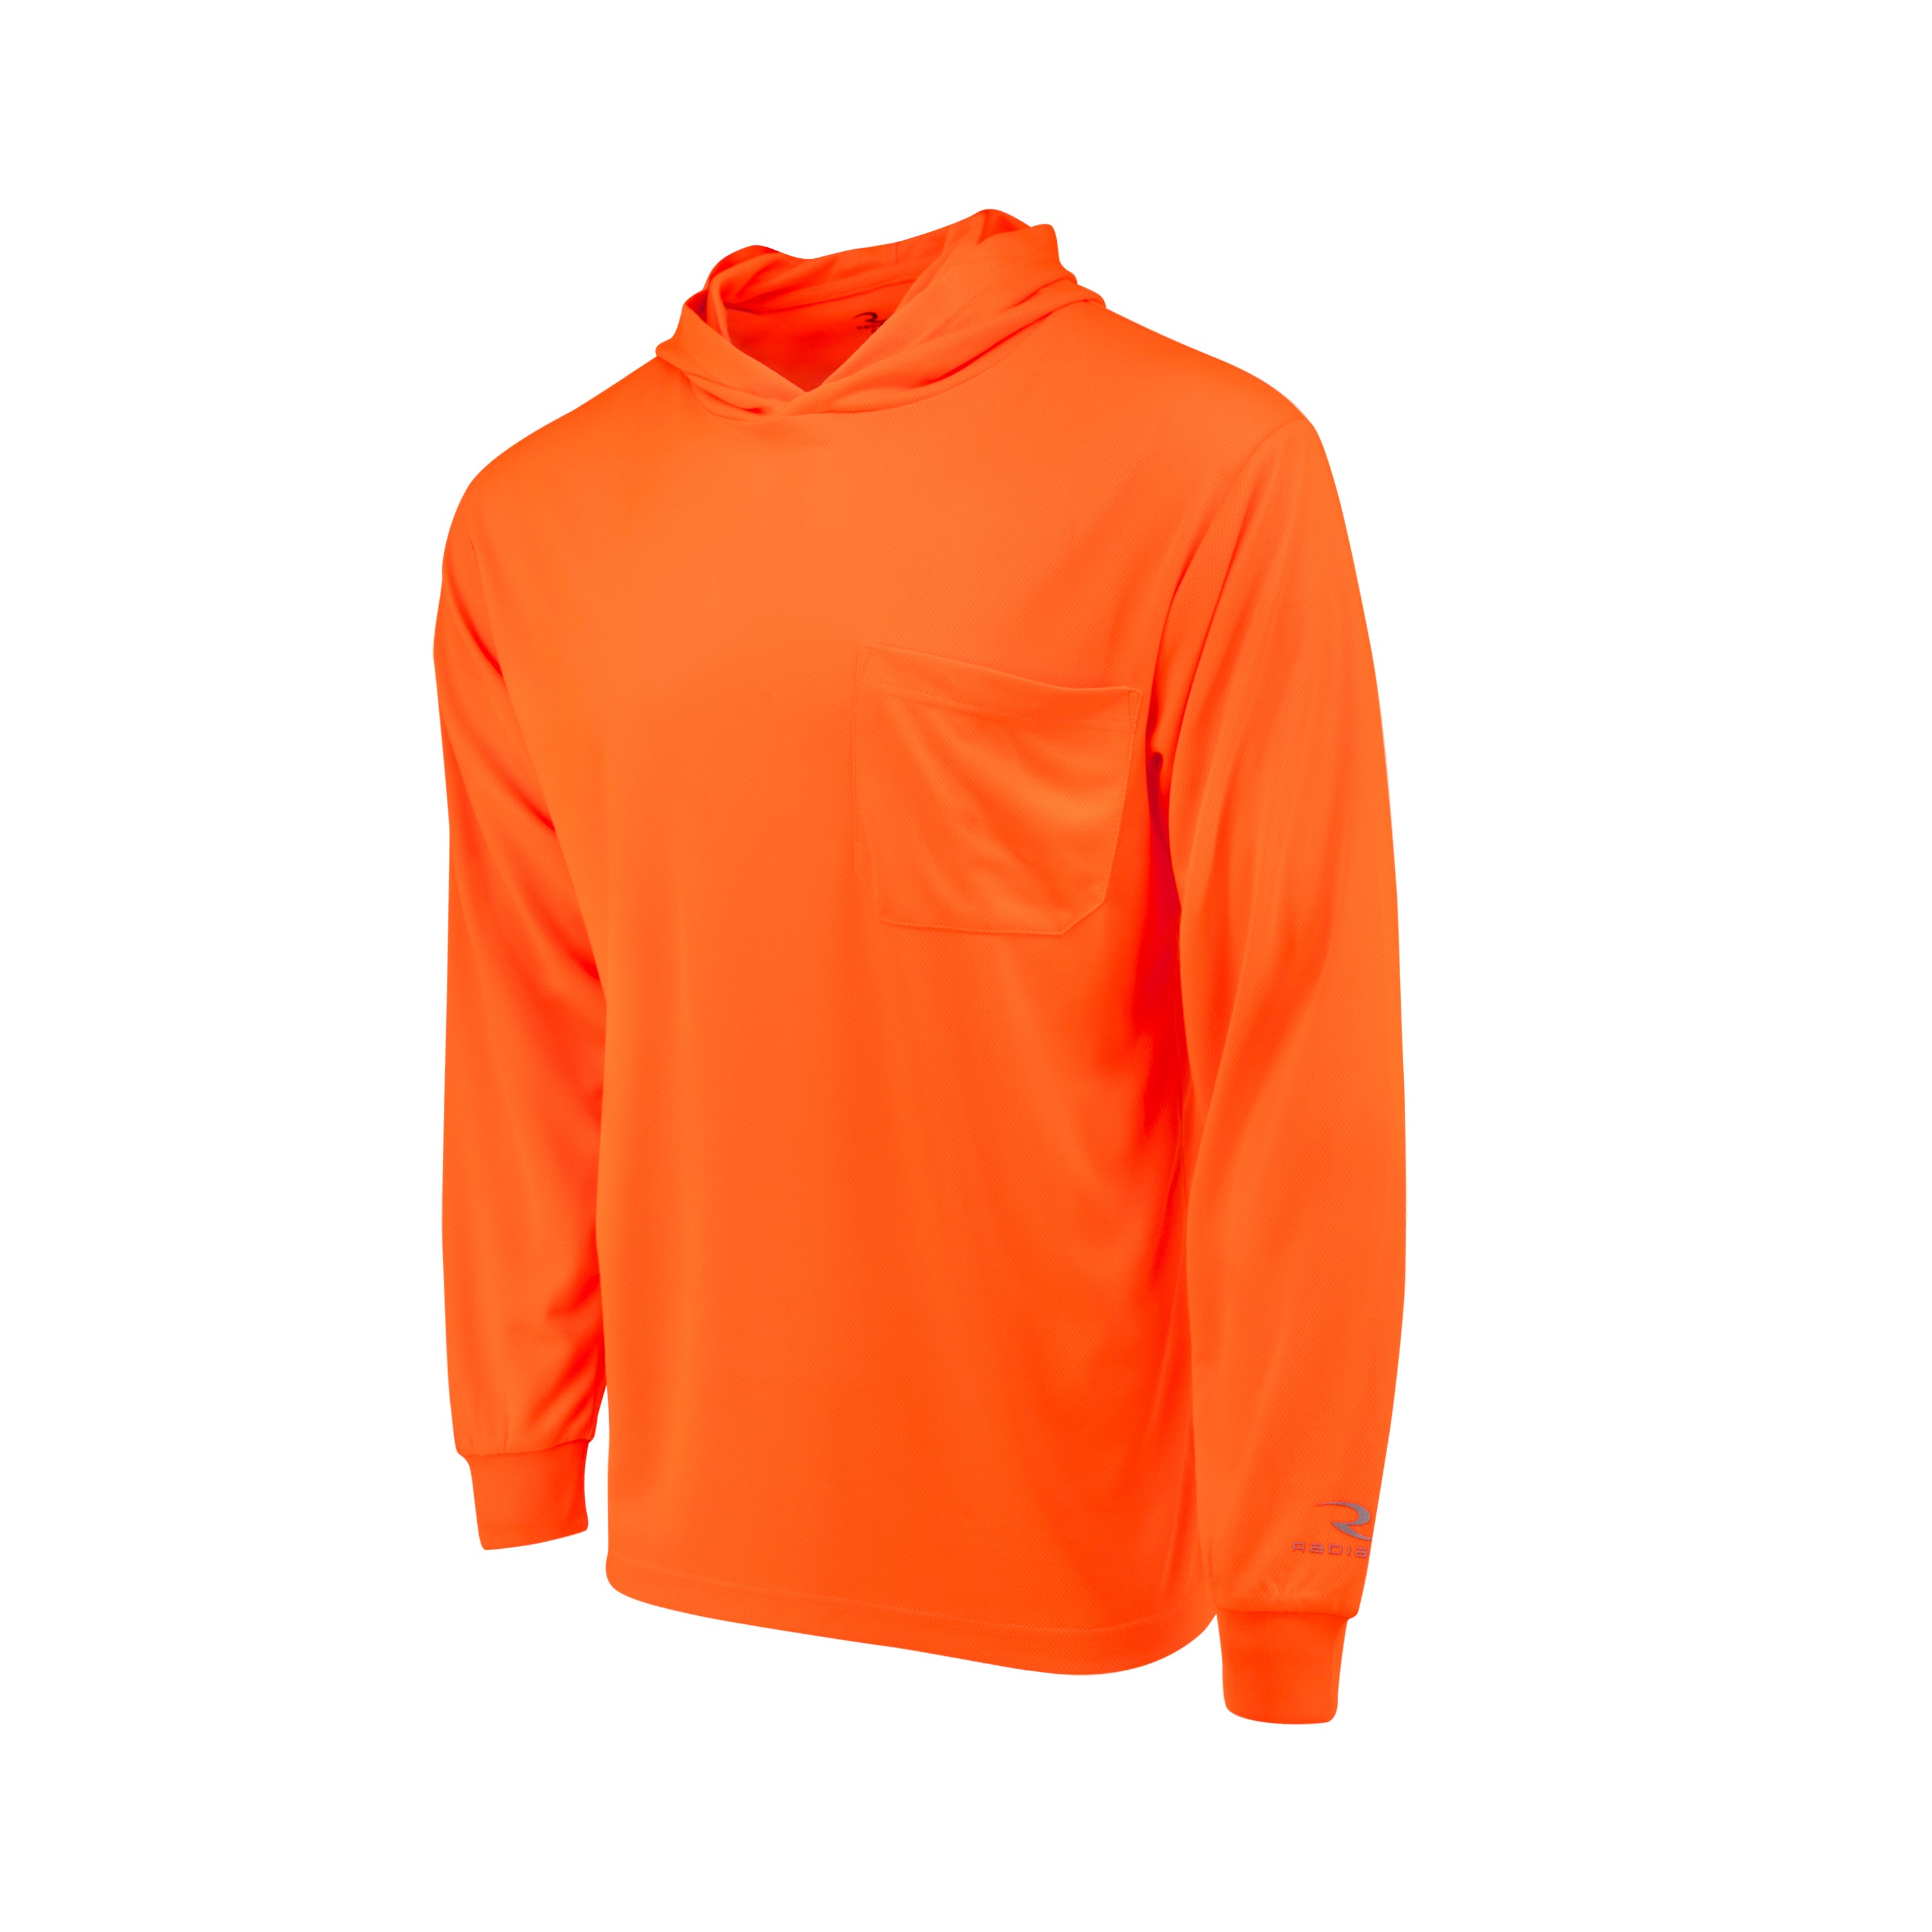 ST61-N Hooded Non Rated Mesh Long Sleeve T-Shirt